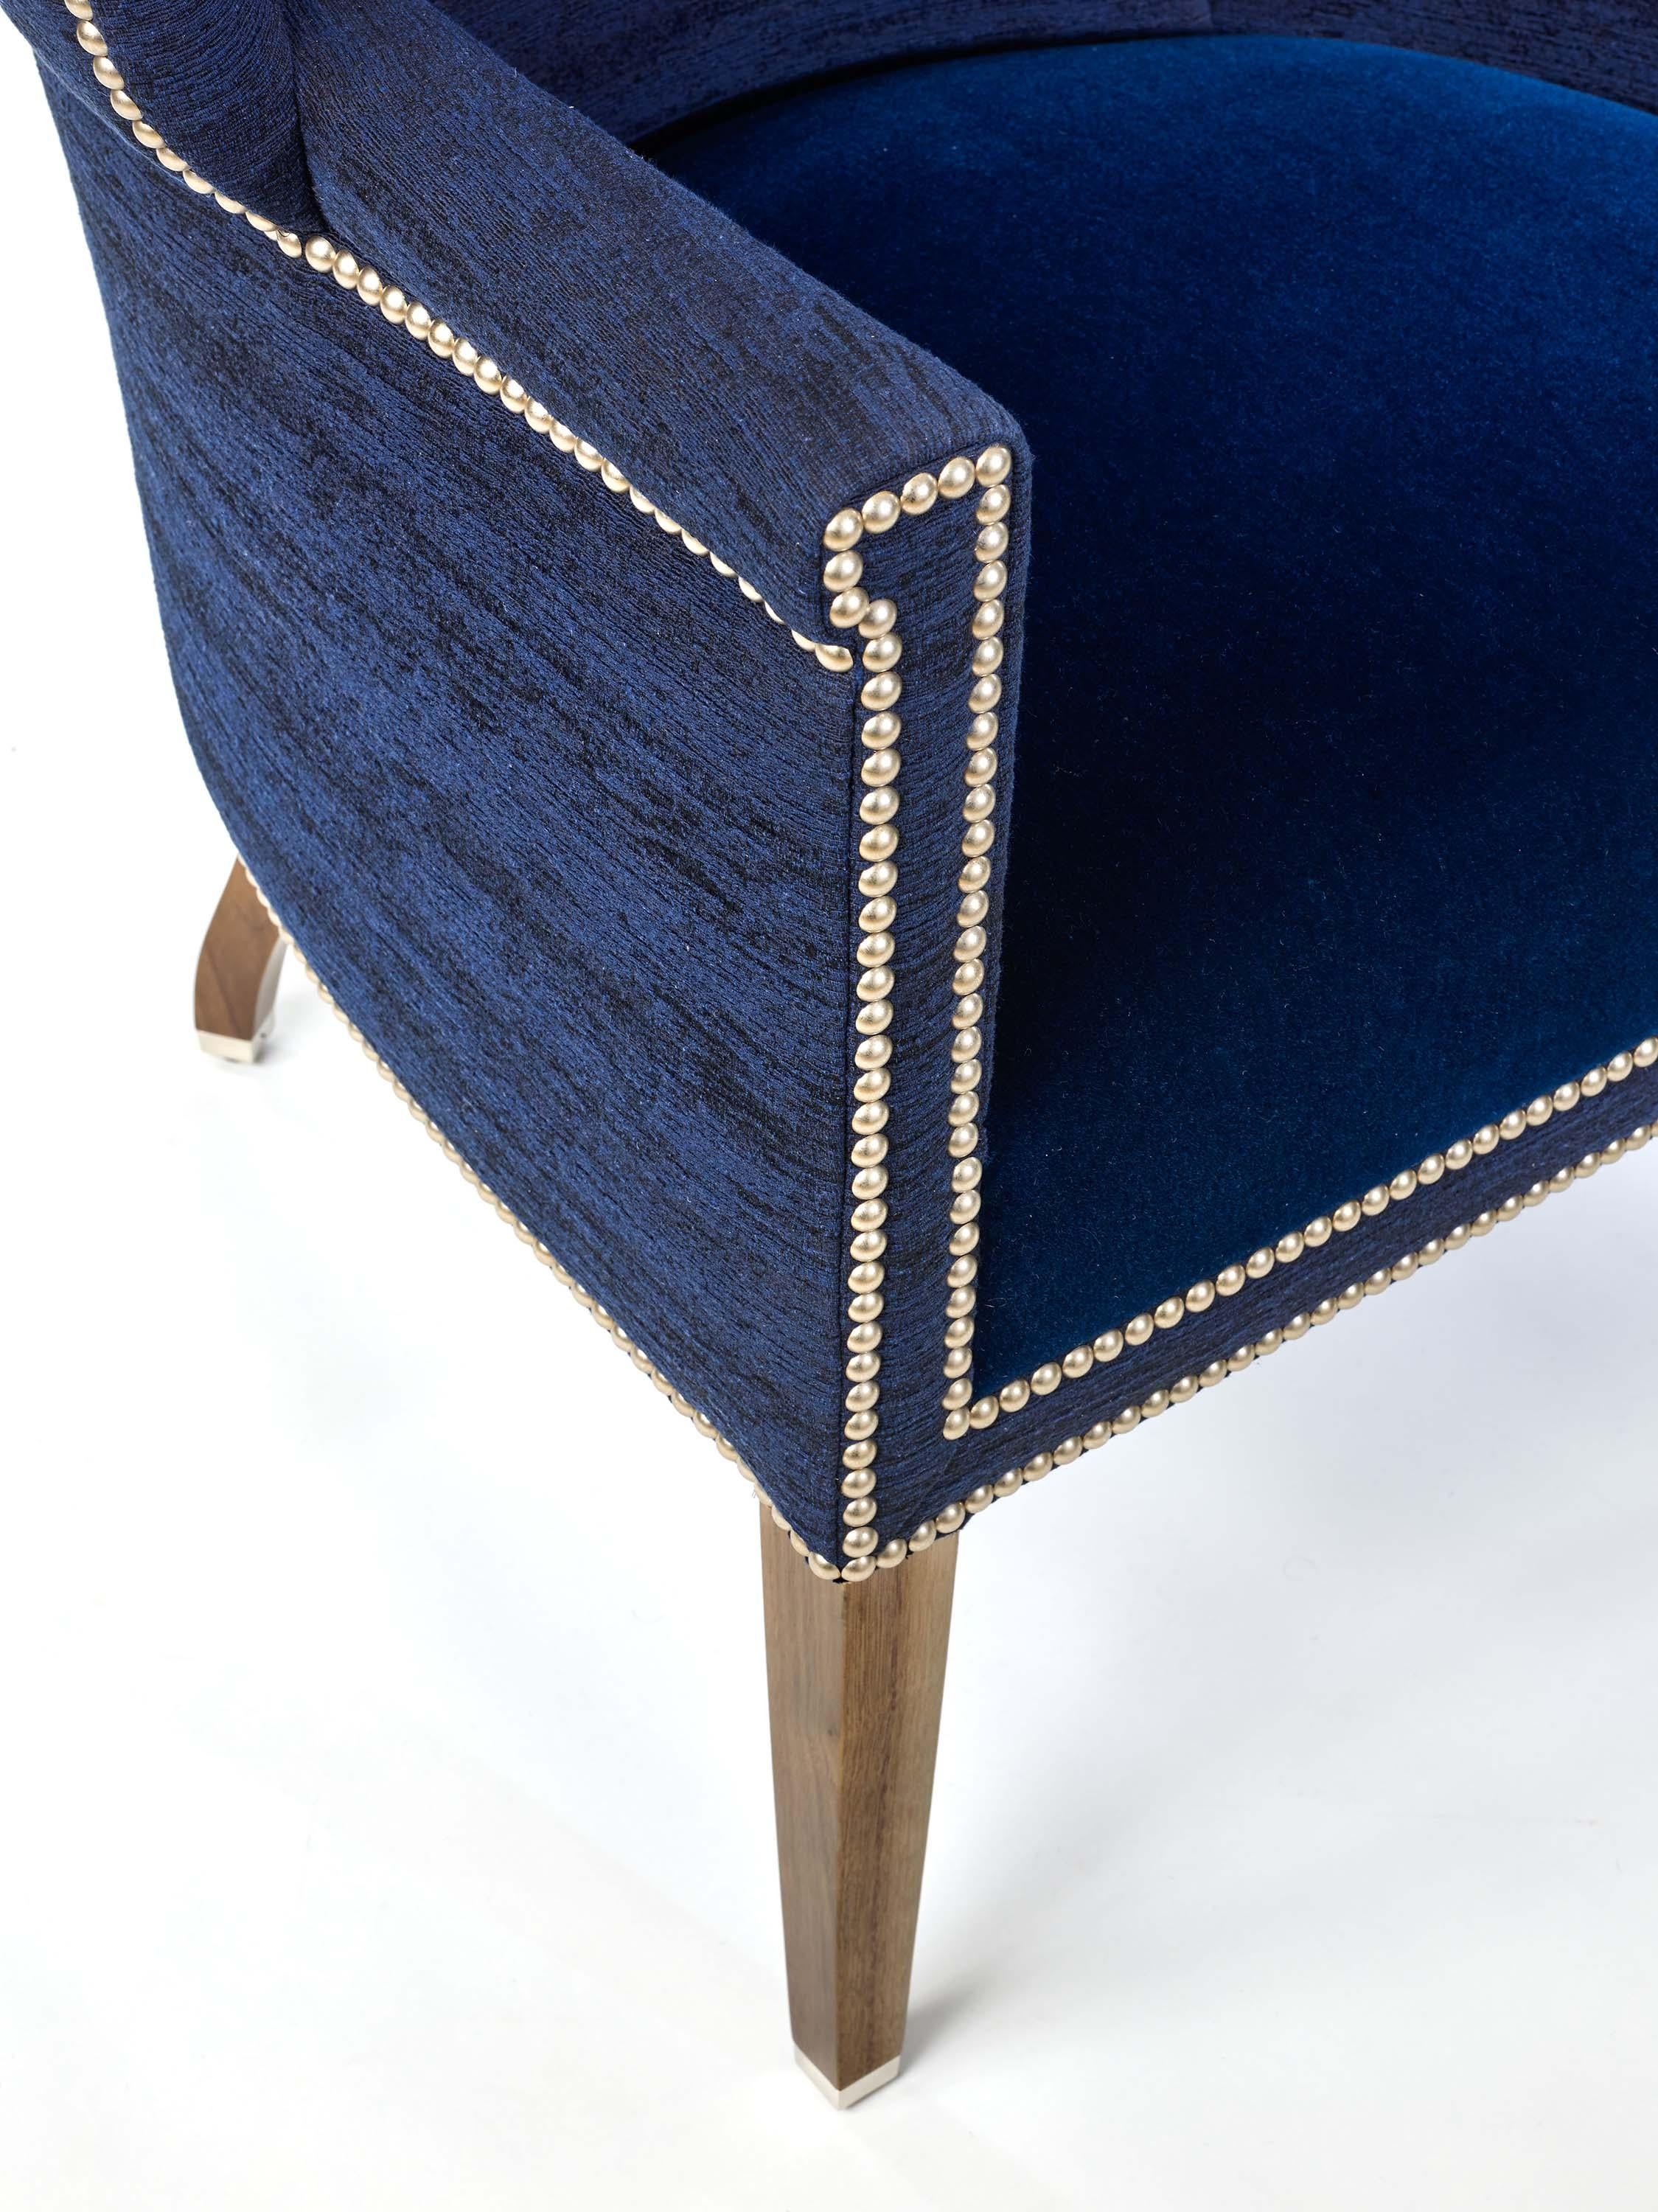 Nickel Donghia Angelo's Wing Chair in Dark Blue Concierge Cotton and Wool Upholstery For Sale